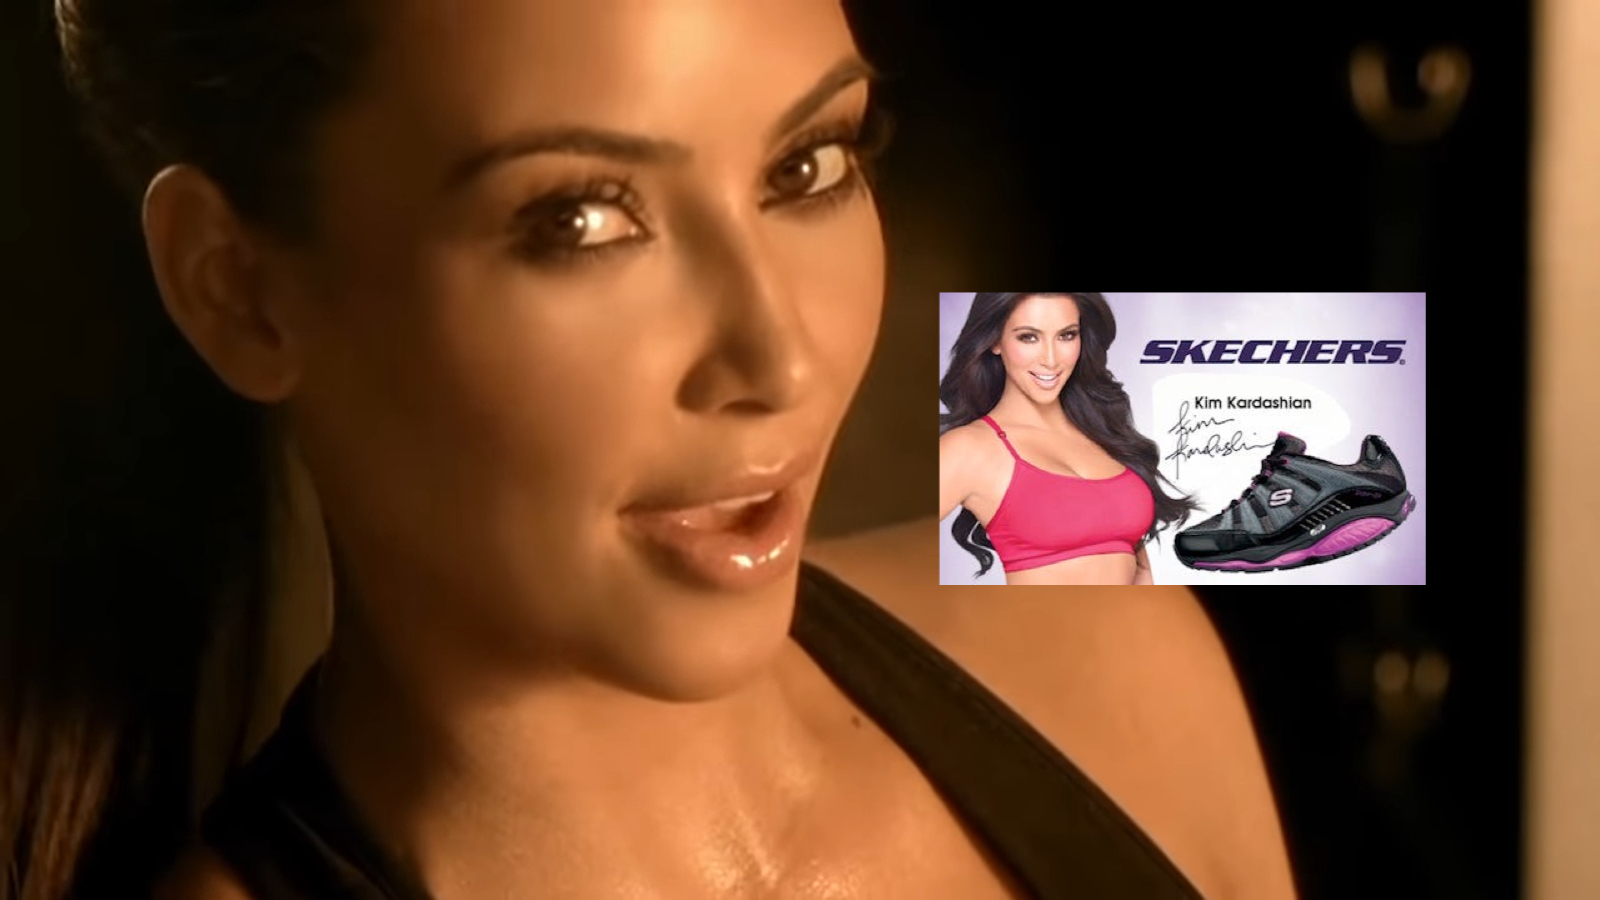 Twitter Remembers Kim Kardashian Once Worked With Skechers After Kanye ...